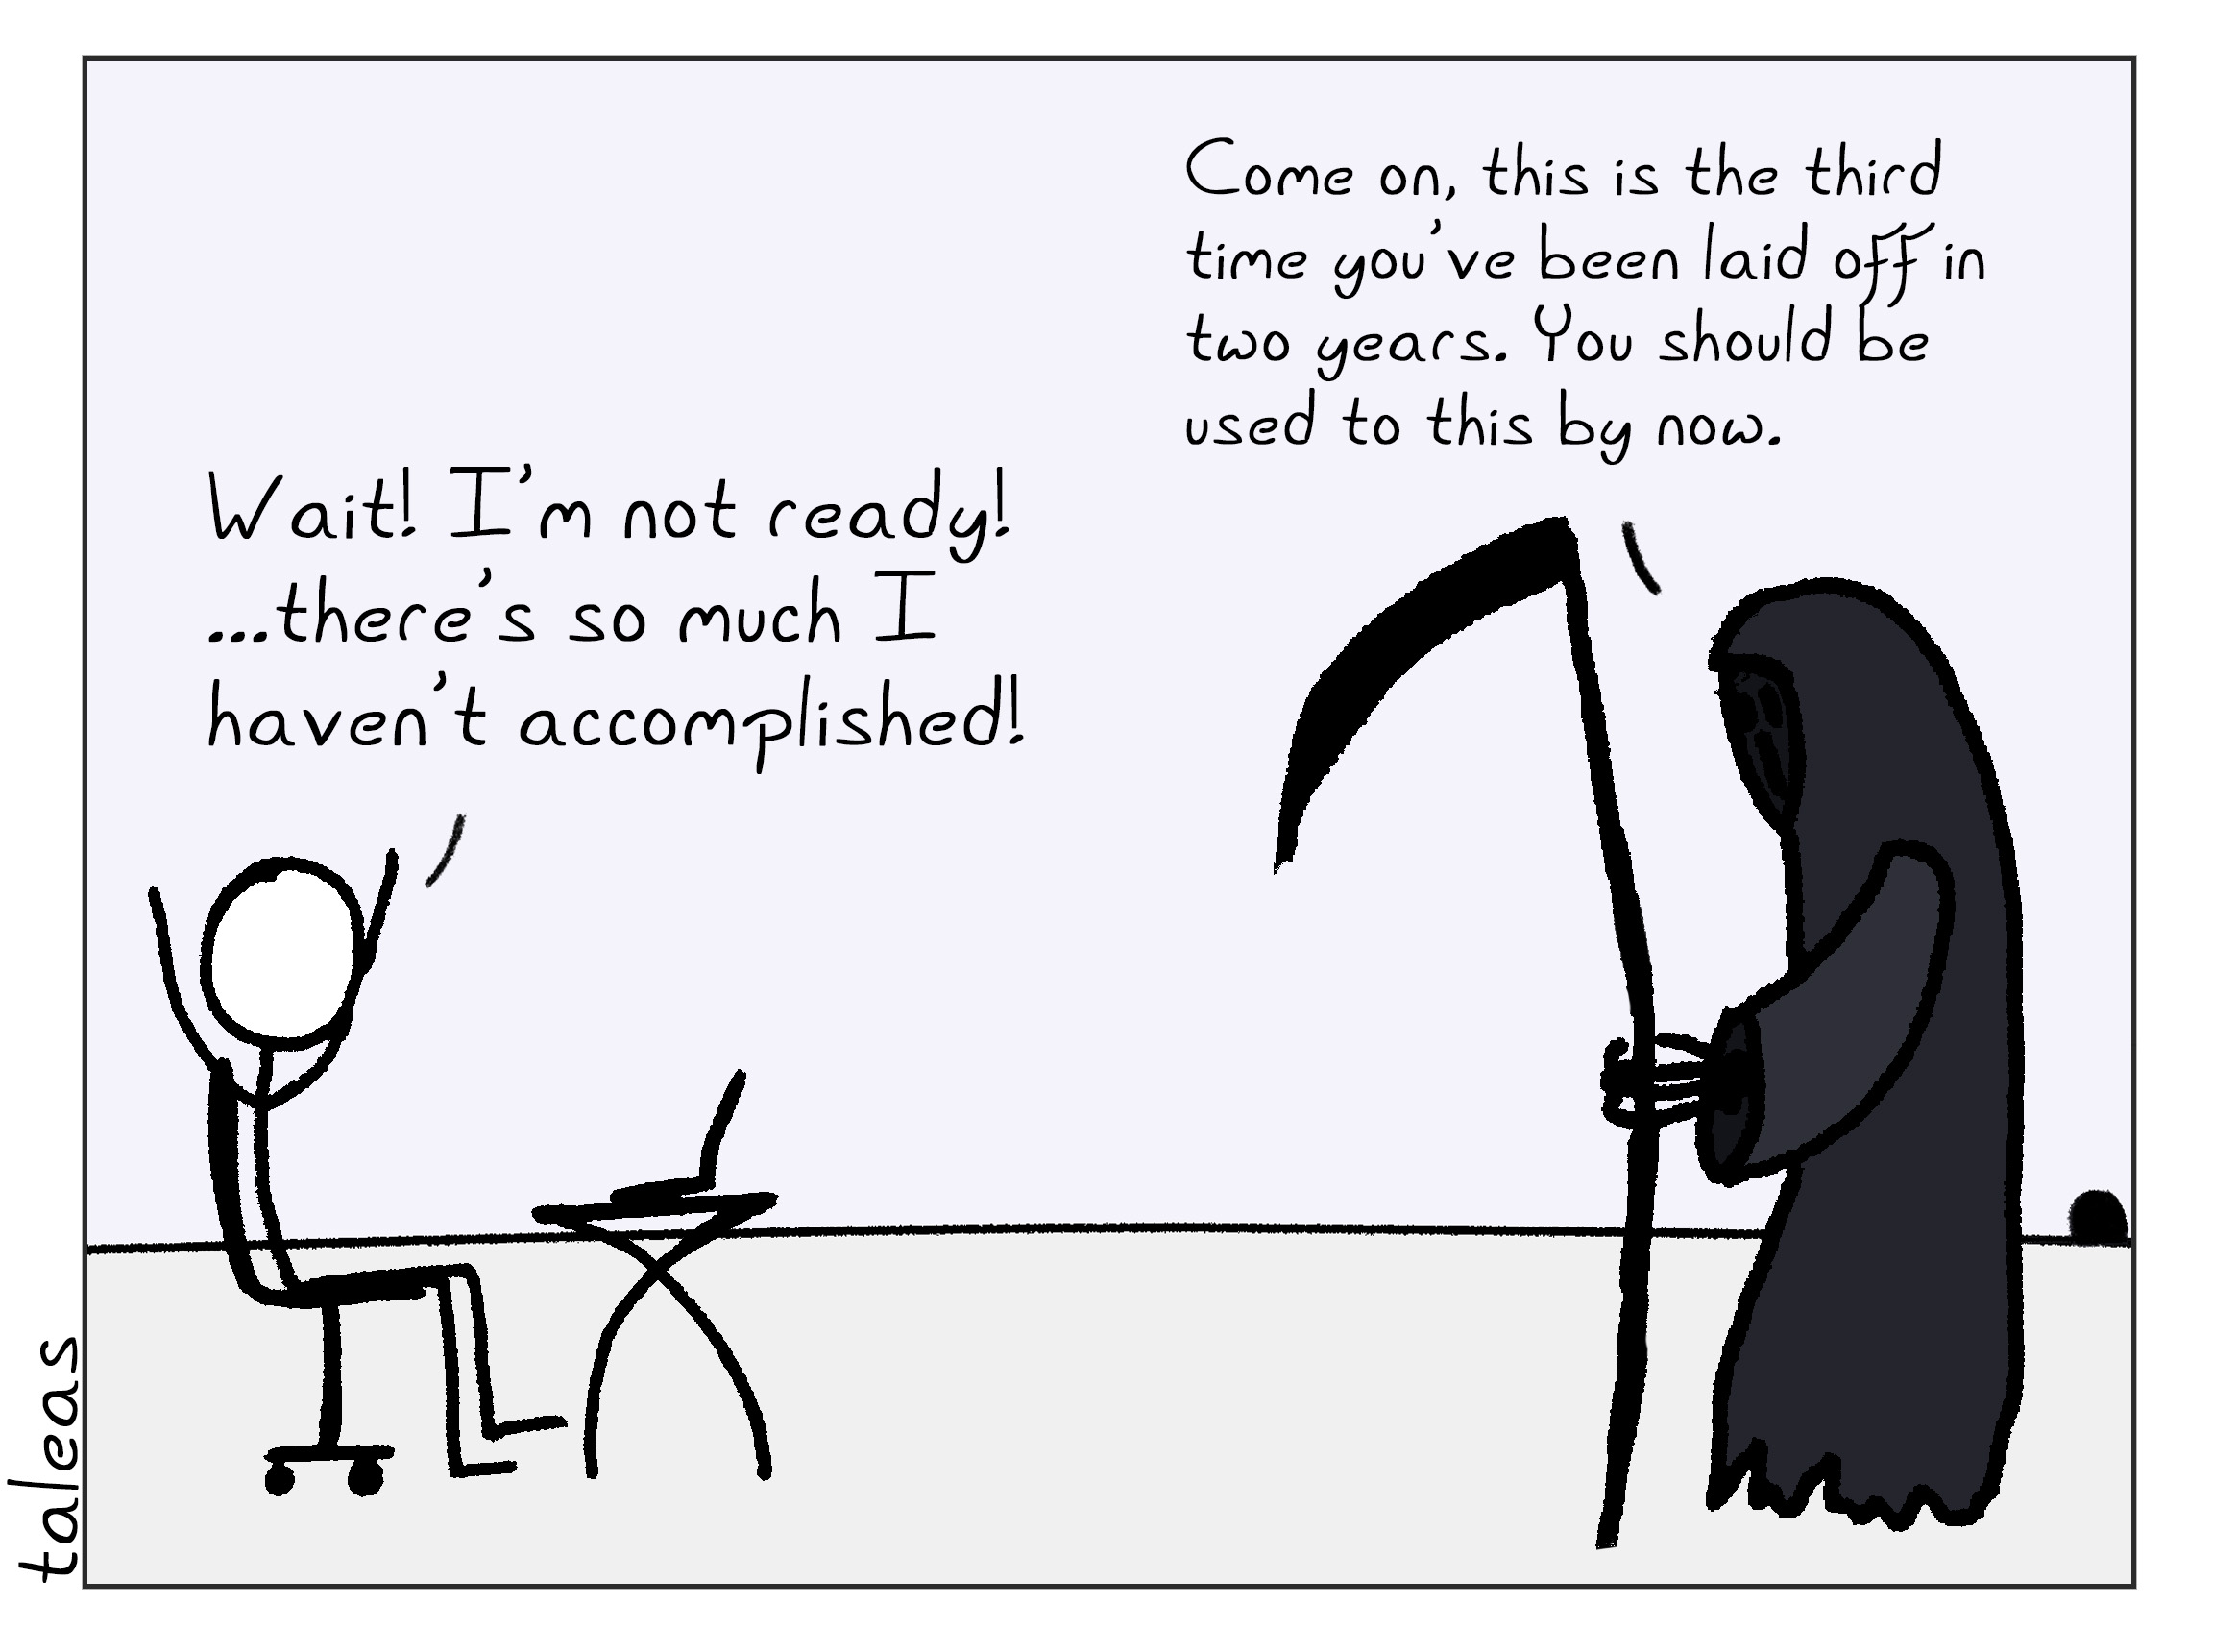 A tech worker is sitting at a modern-looking desk with a laptop, hands raised exclaiming, "Wait! I'm not ready! ...there's so much I haven't accomplished!" Entering from the right, a tall Grim Reaper holding a scythe responds casually, "Come on, this is the third time you've been laid off in two years. You should be used to this by now."